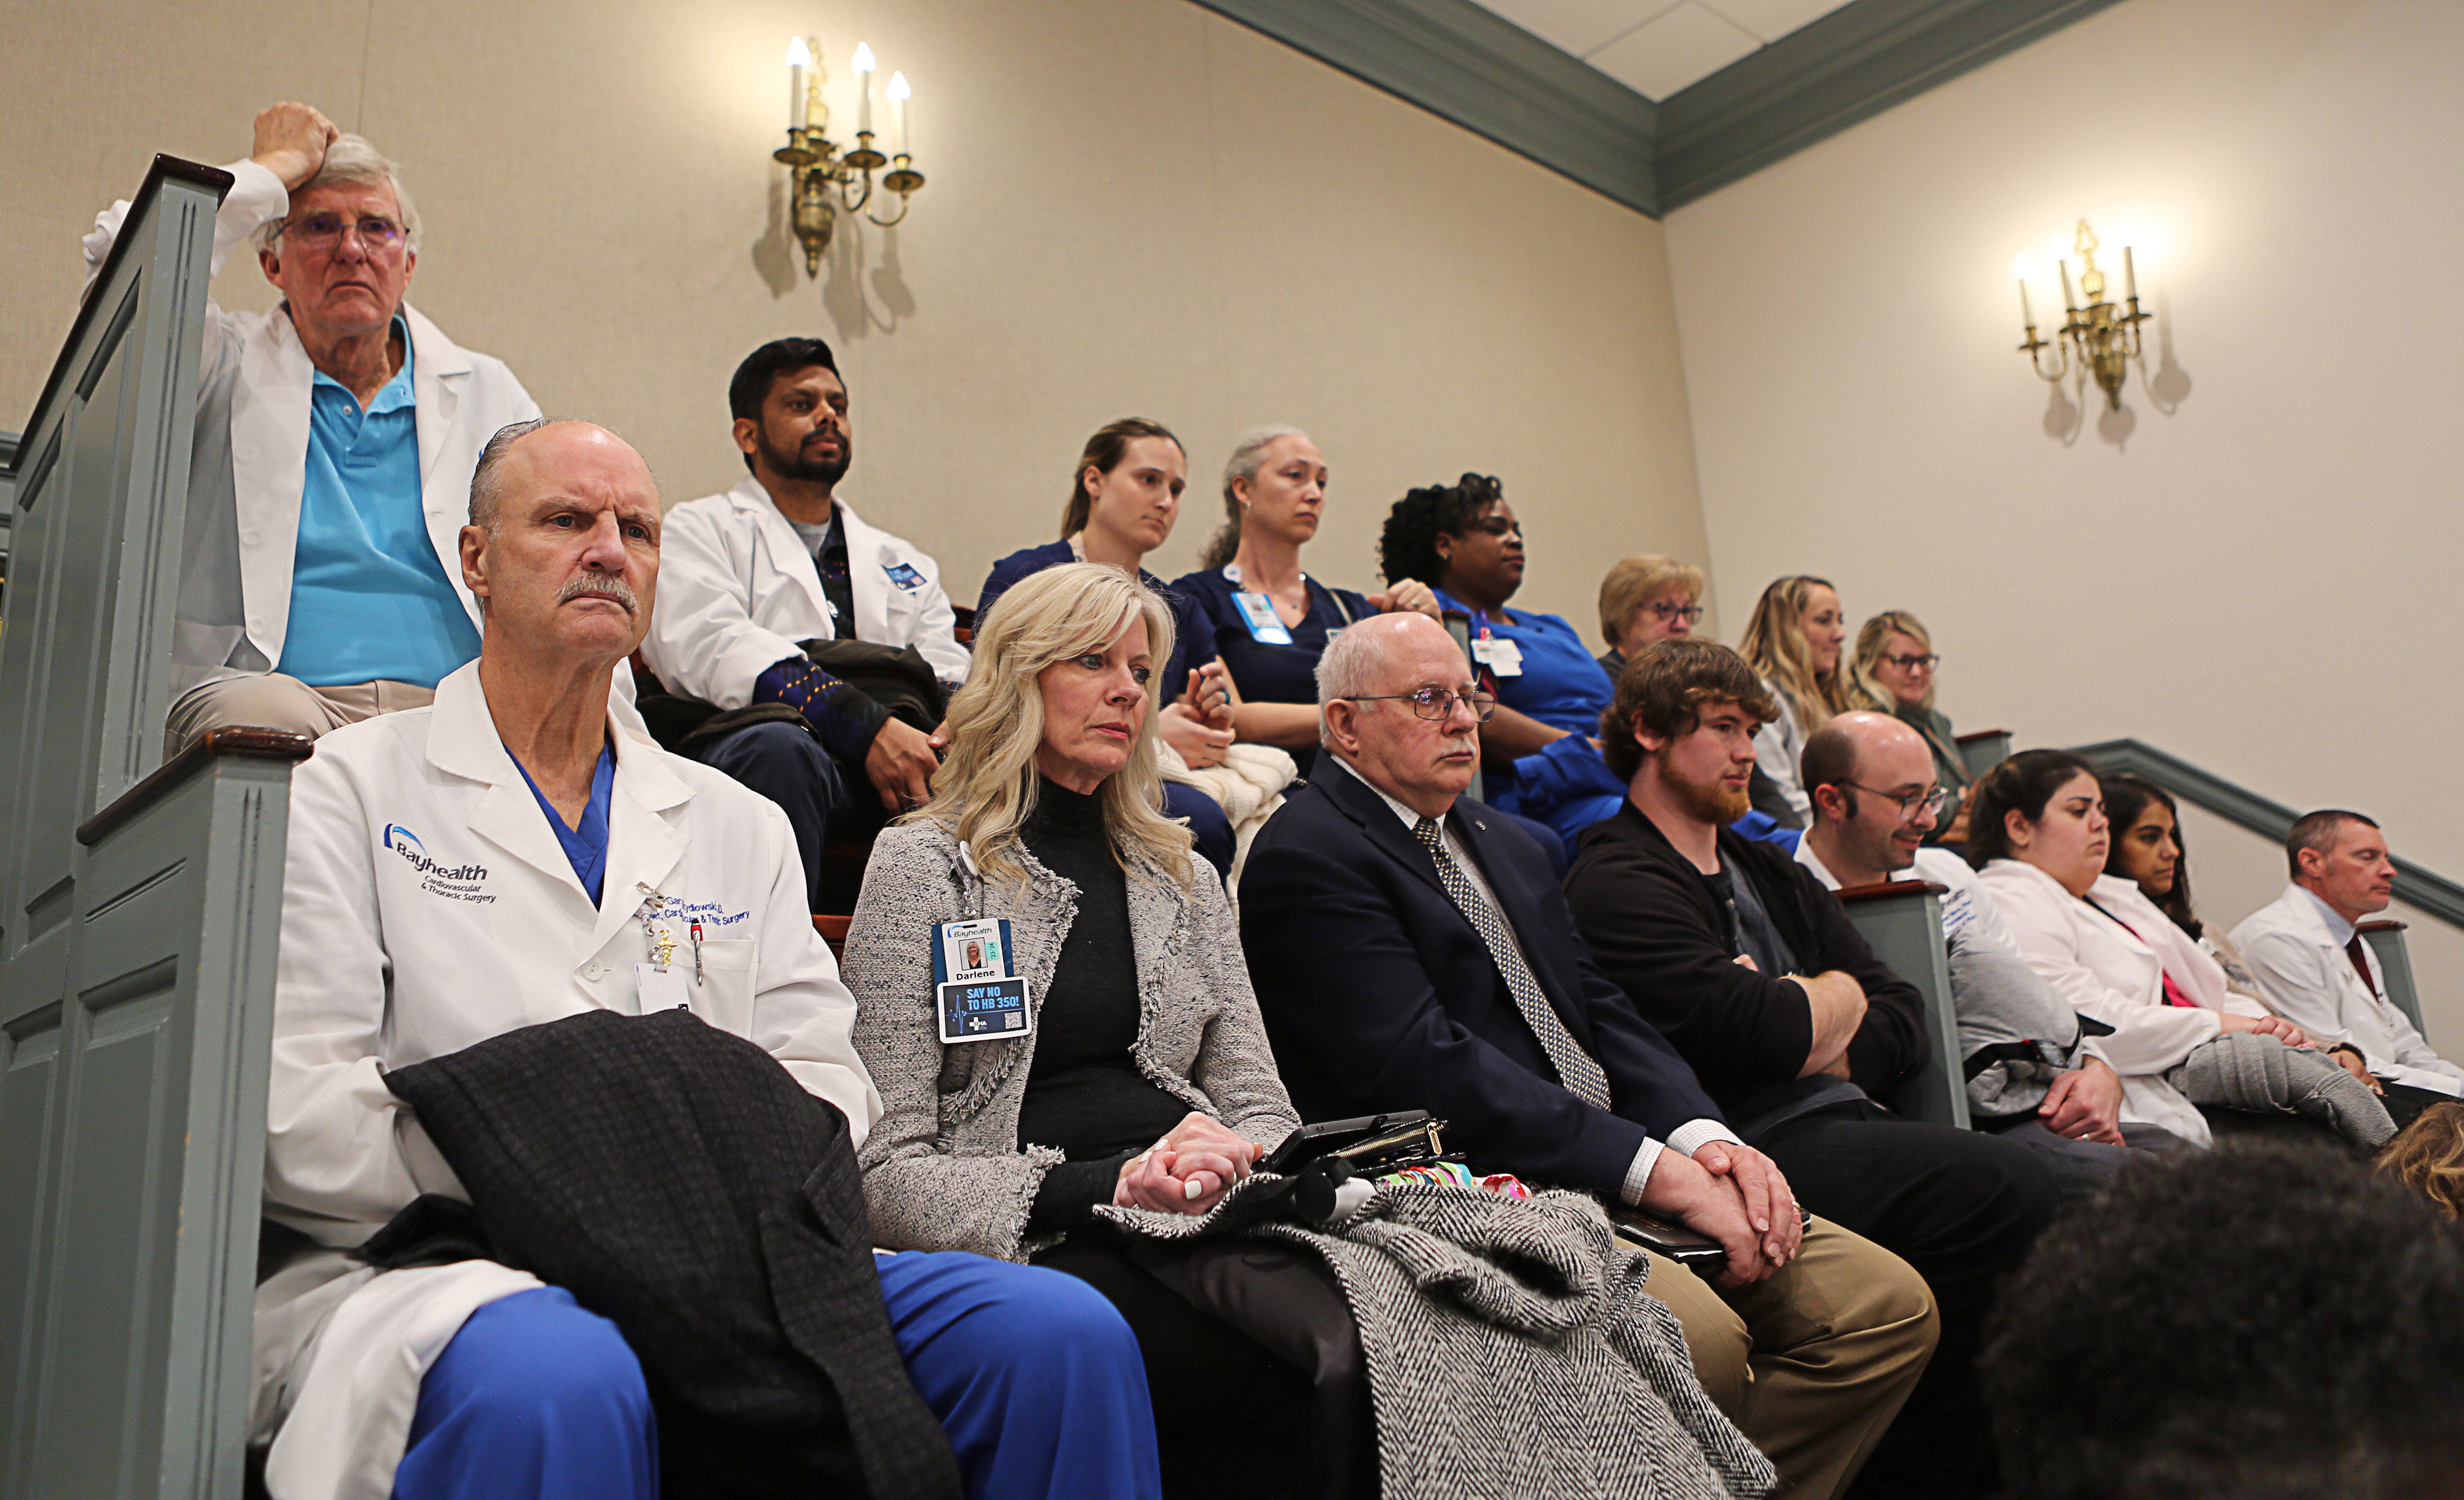 After major pushback, Delaware's hospital cost review board bill to see vote. What changed?